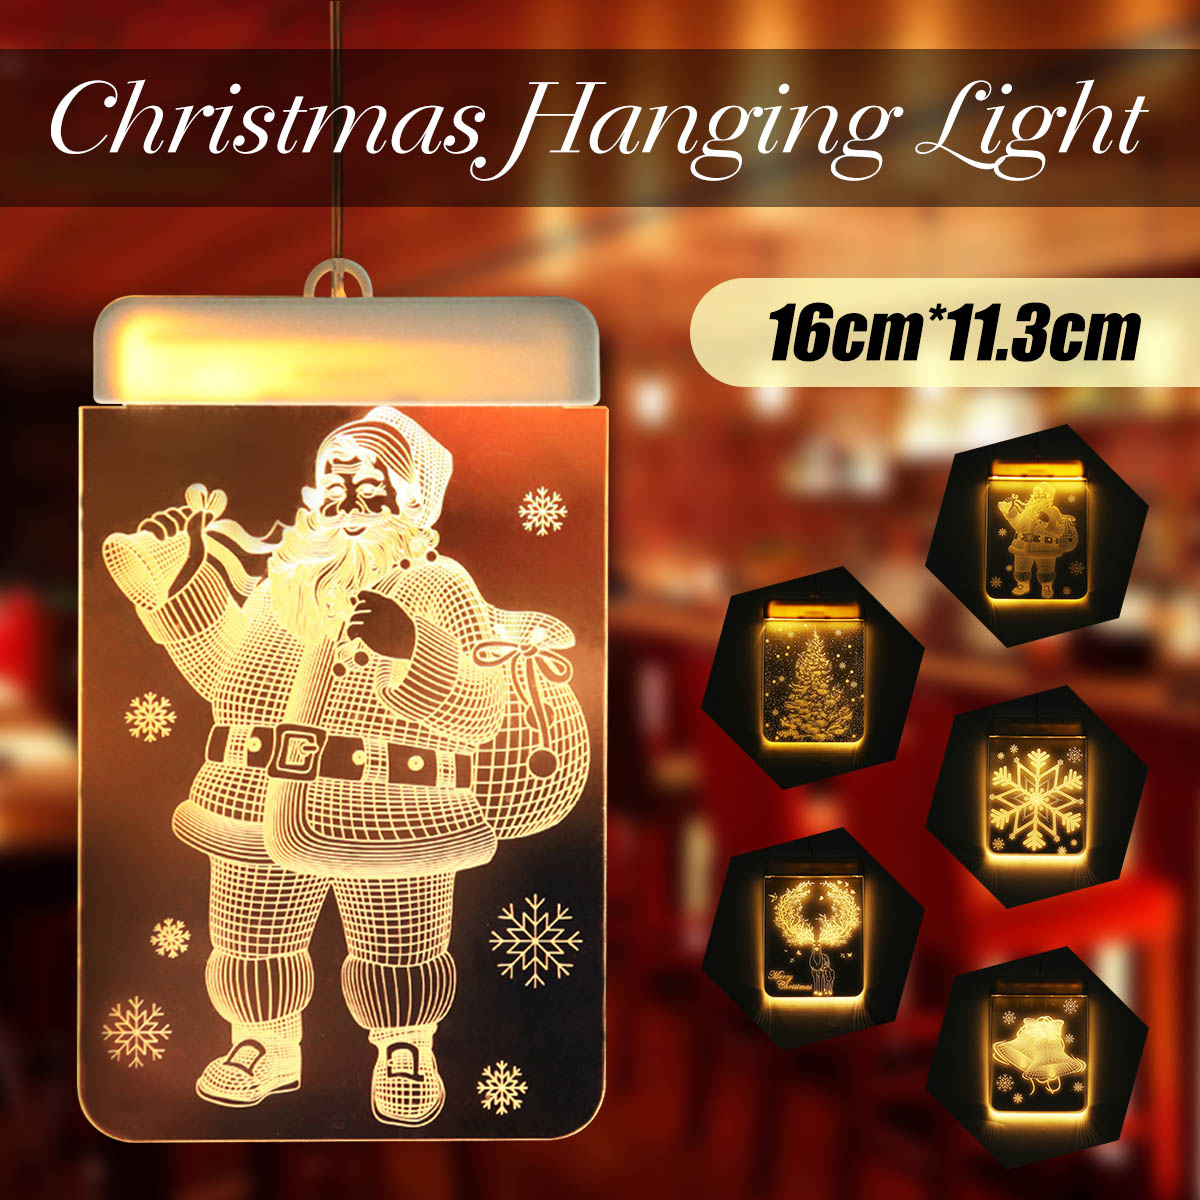 Christmas-Hanging-LED-String-Light-Warm-White-Battery-Supply-Festival-Party-Holiday-Light-Decor-1567248-1